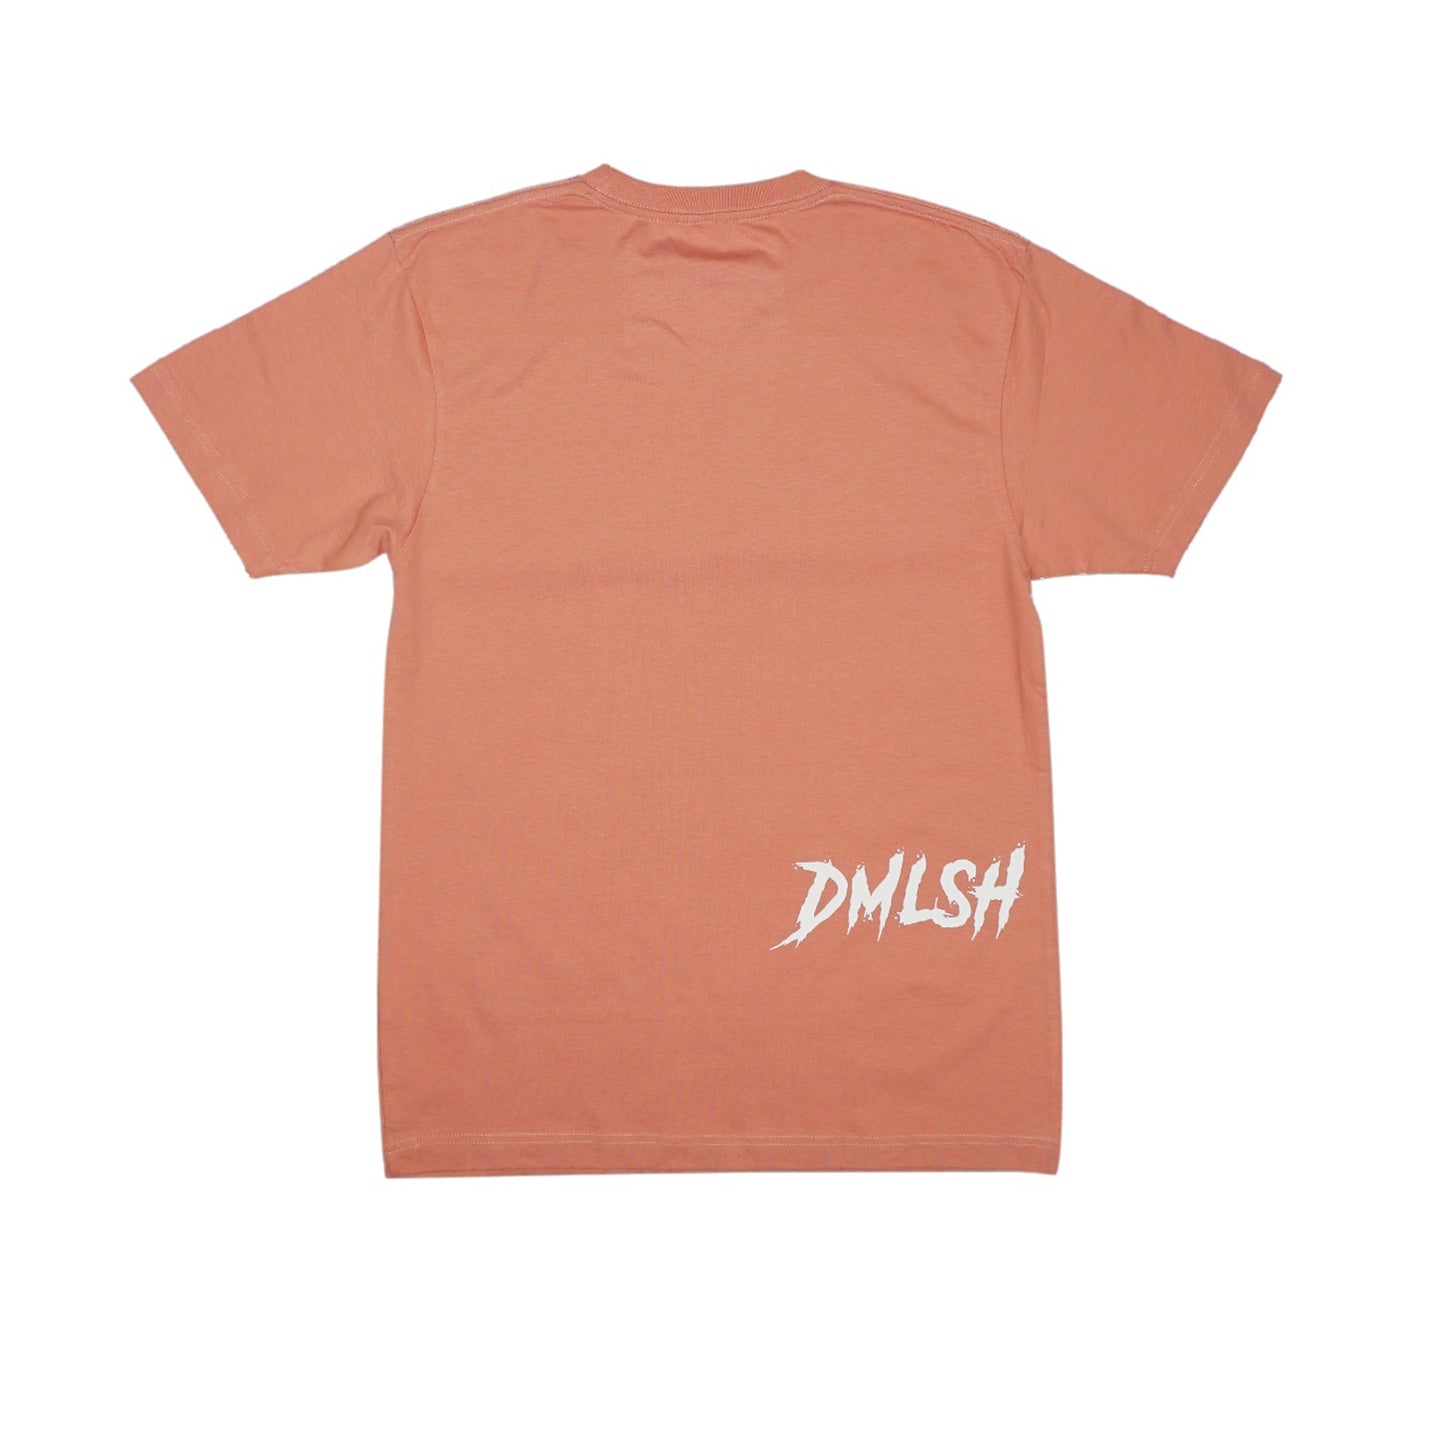 Cooler Than A Flamingo Tee (Dusty Rose)